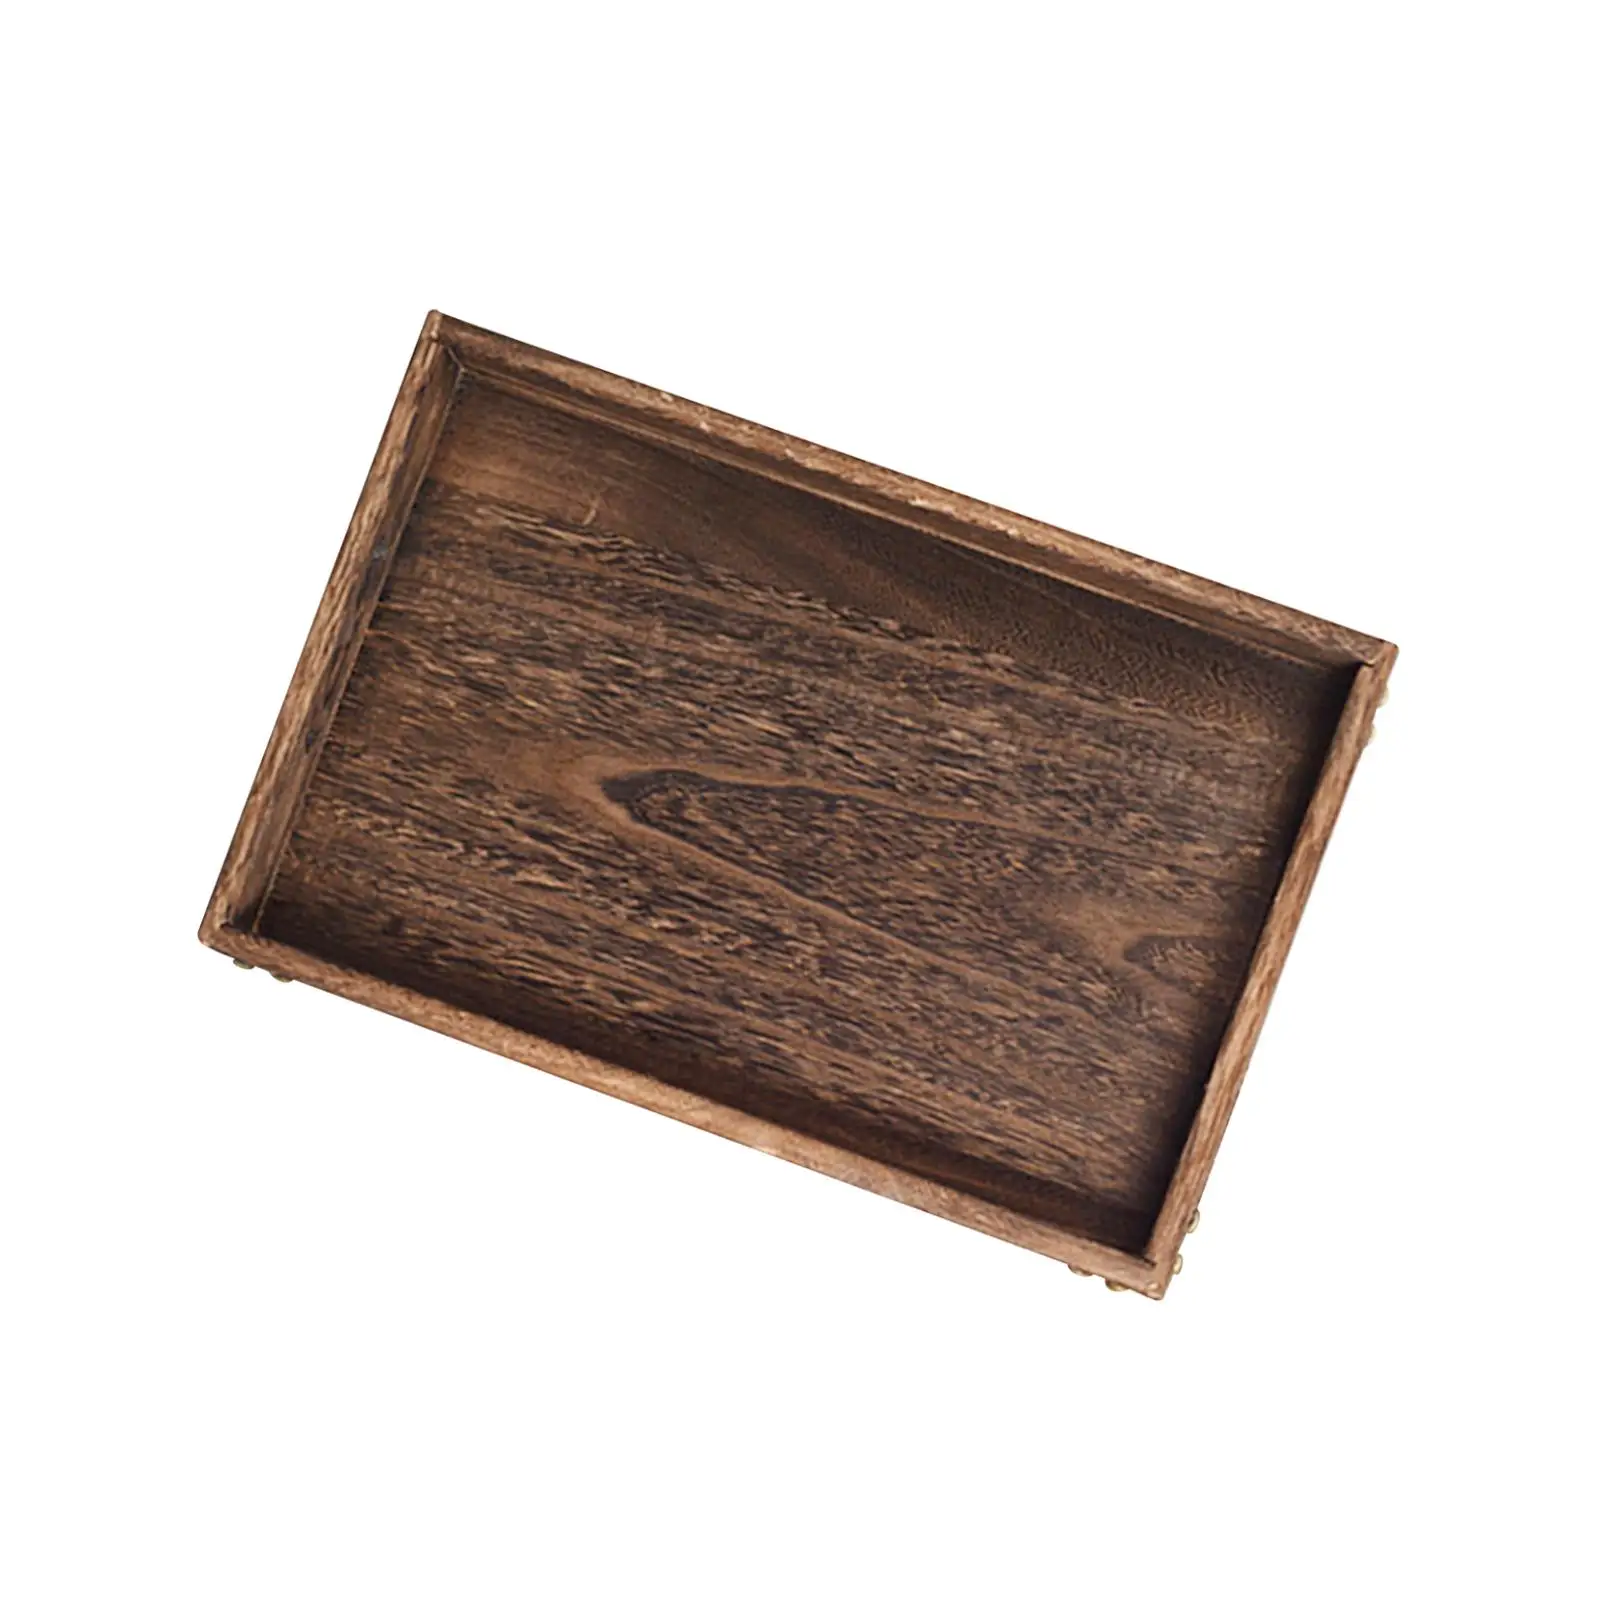 Rustic Wood Serving Tray Platter Ottoman Tray Food Trays Convenient for Serving Drinks Multifunctional Durable